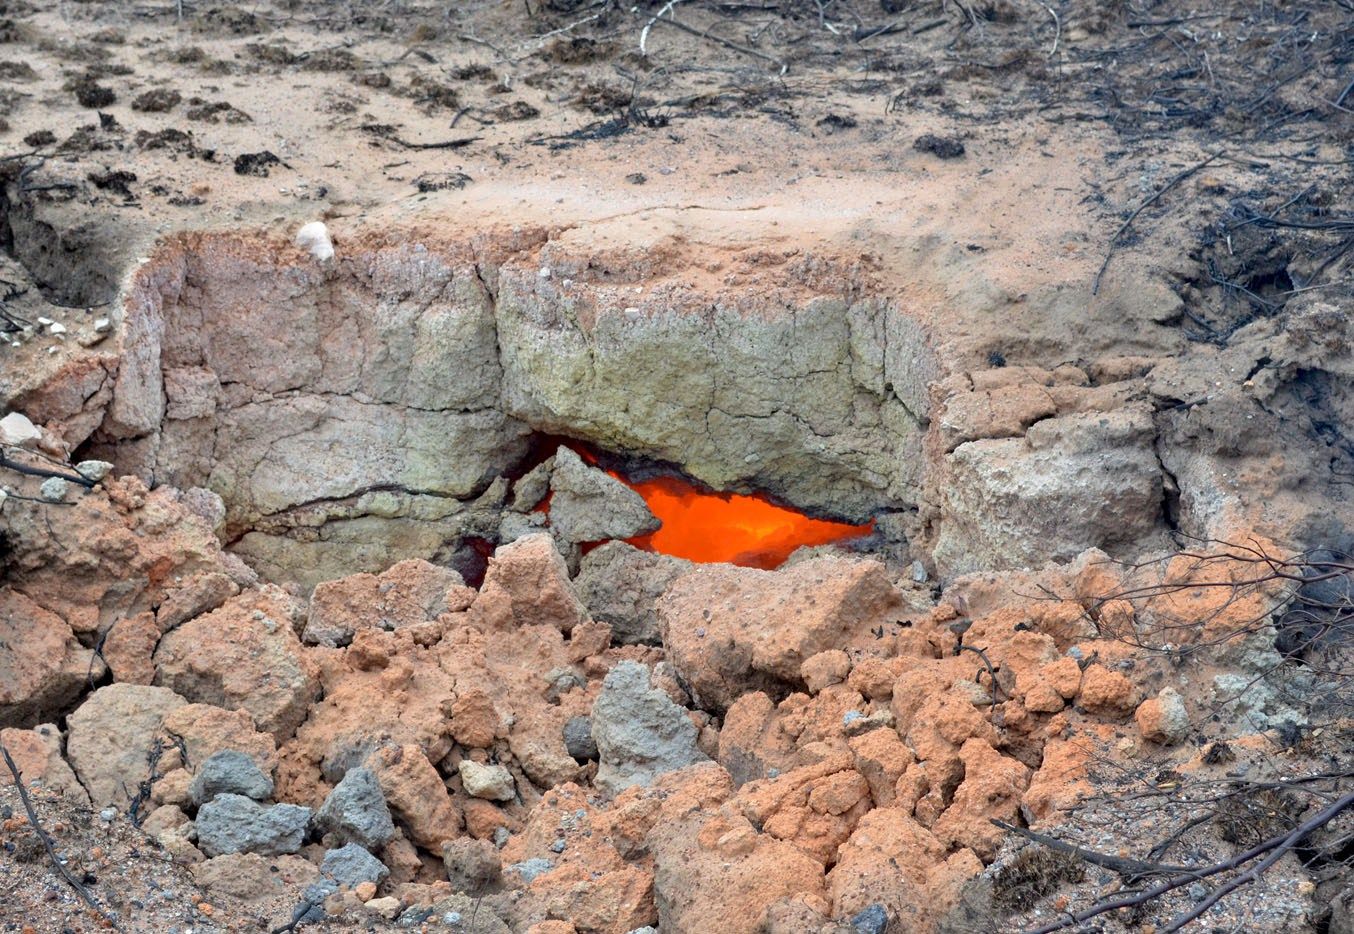 The ground near Anker Coal’s Golfview operation outside Ermelo glows molten orange from an underground fire. Illegal, small-scale coal miners run a profitable operation out of another part of the company’s mine. Image by Mark Olalde. South Africa, 2017. 